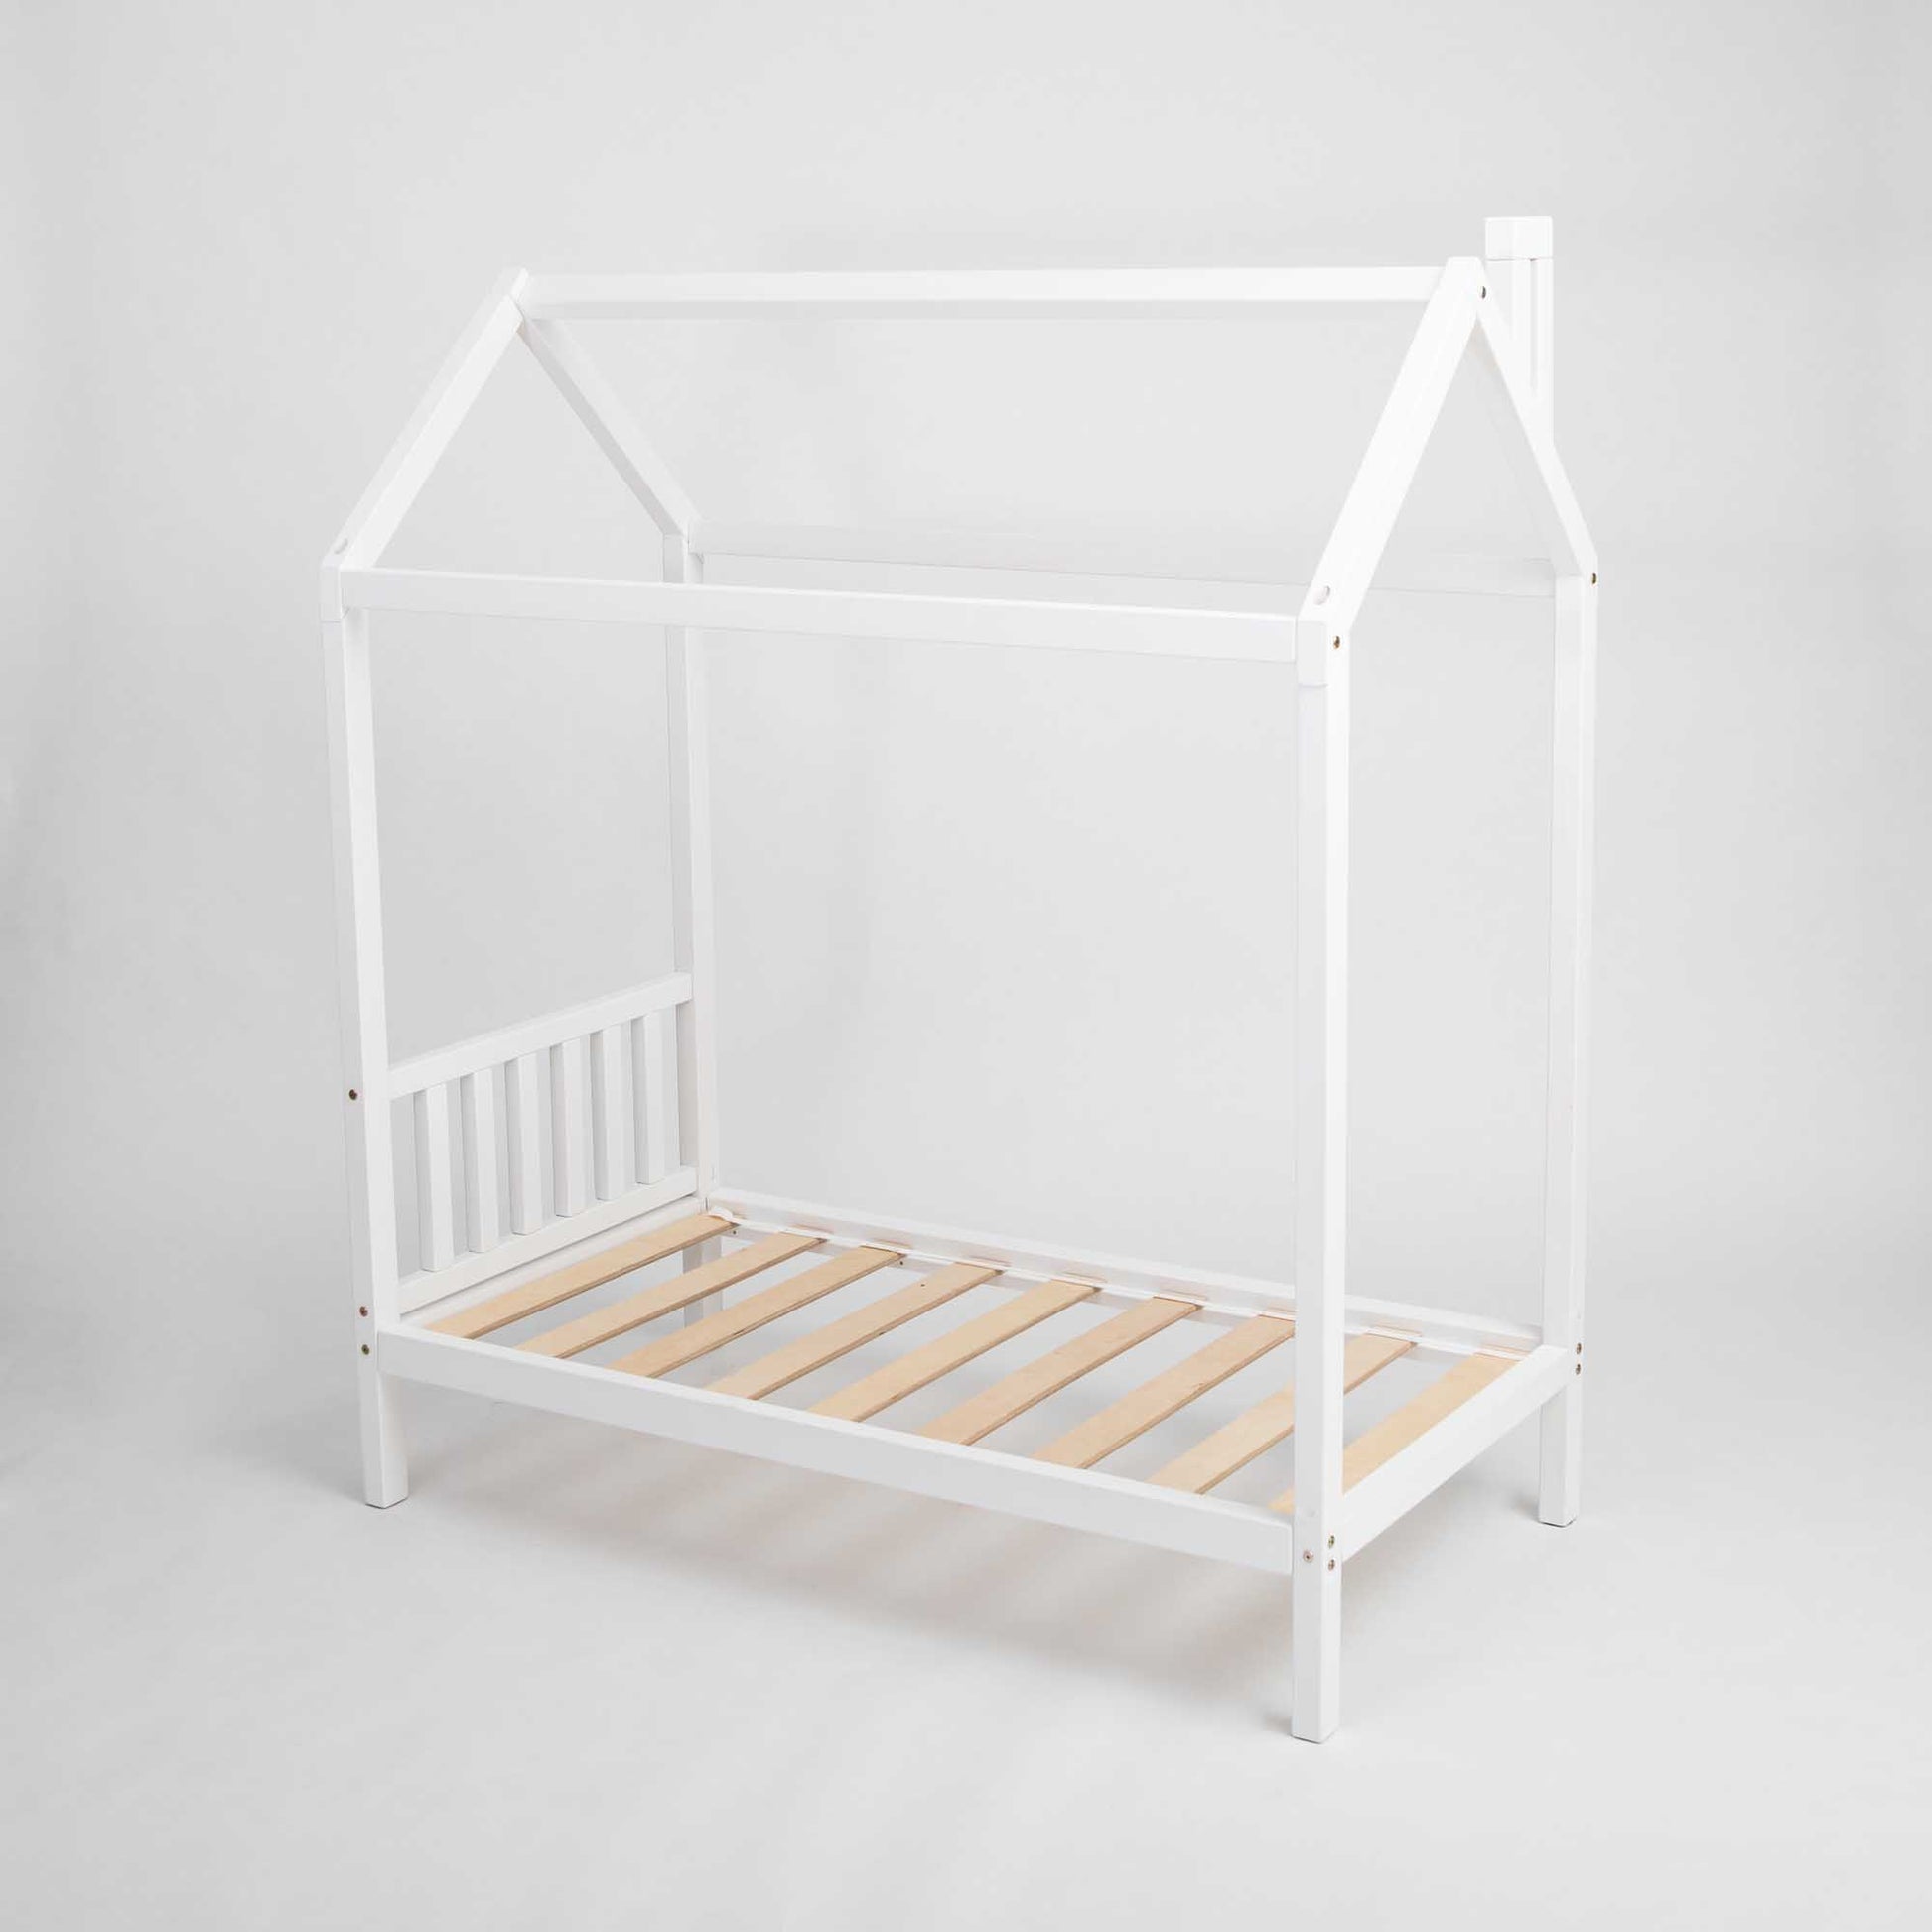 A white toddlers' house bed on legs with a headboard, raised on legs like a house bed.